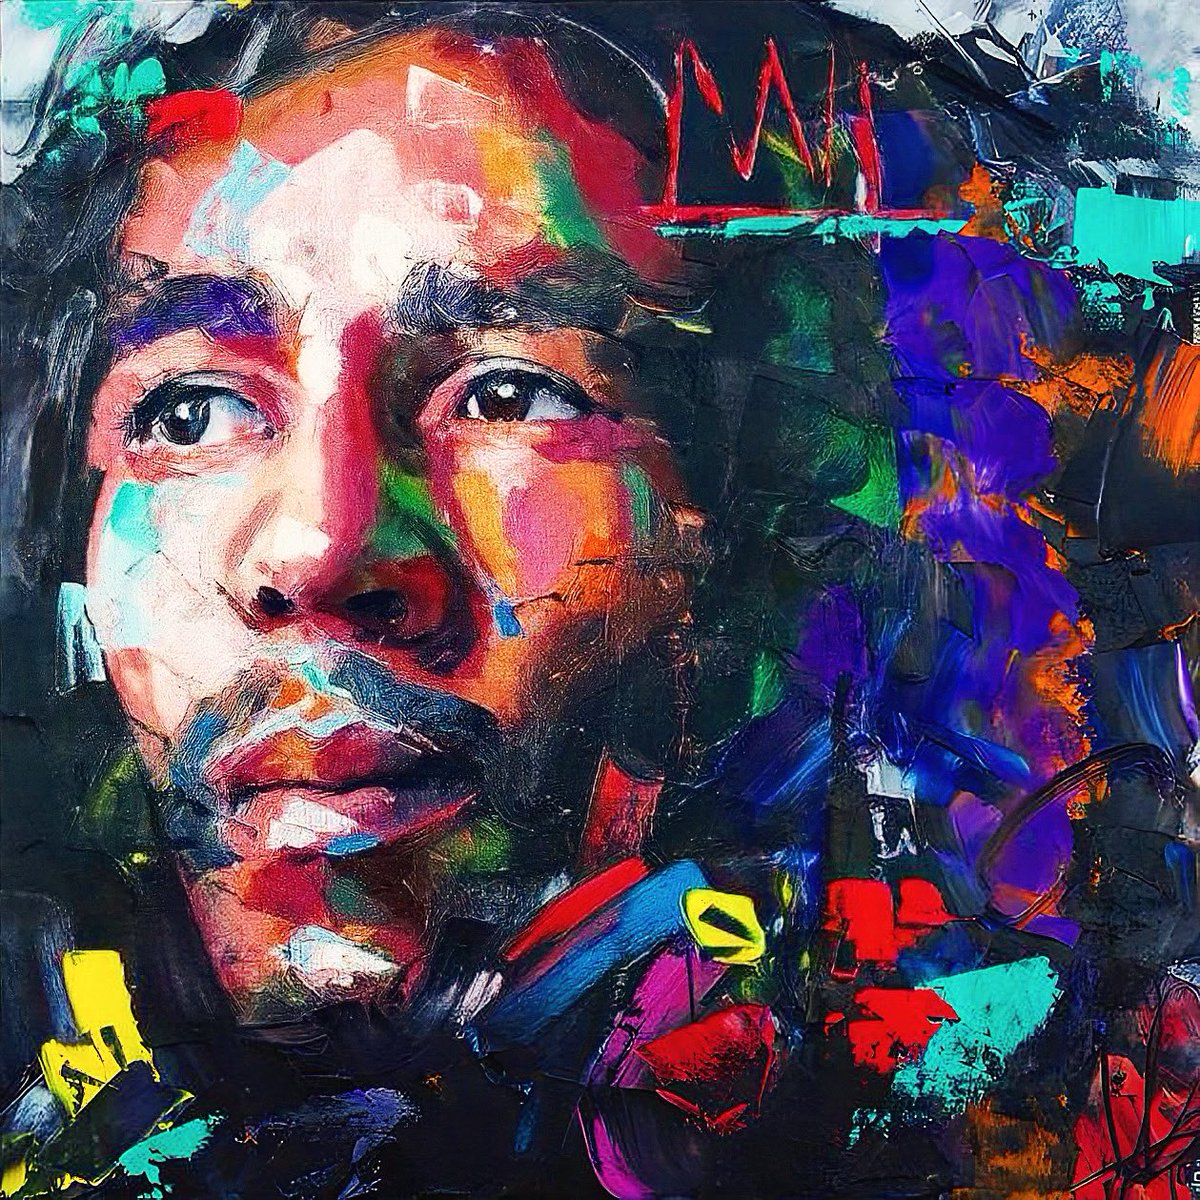 “Don’t gain the world and lose your soul. Wisdom is better than silver and gold.” #ZionTrain #BobMarley 🎨 by @richarddayart Post your original works tagged #bobmarleyart and we’ll share some favorites!